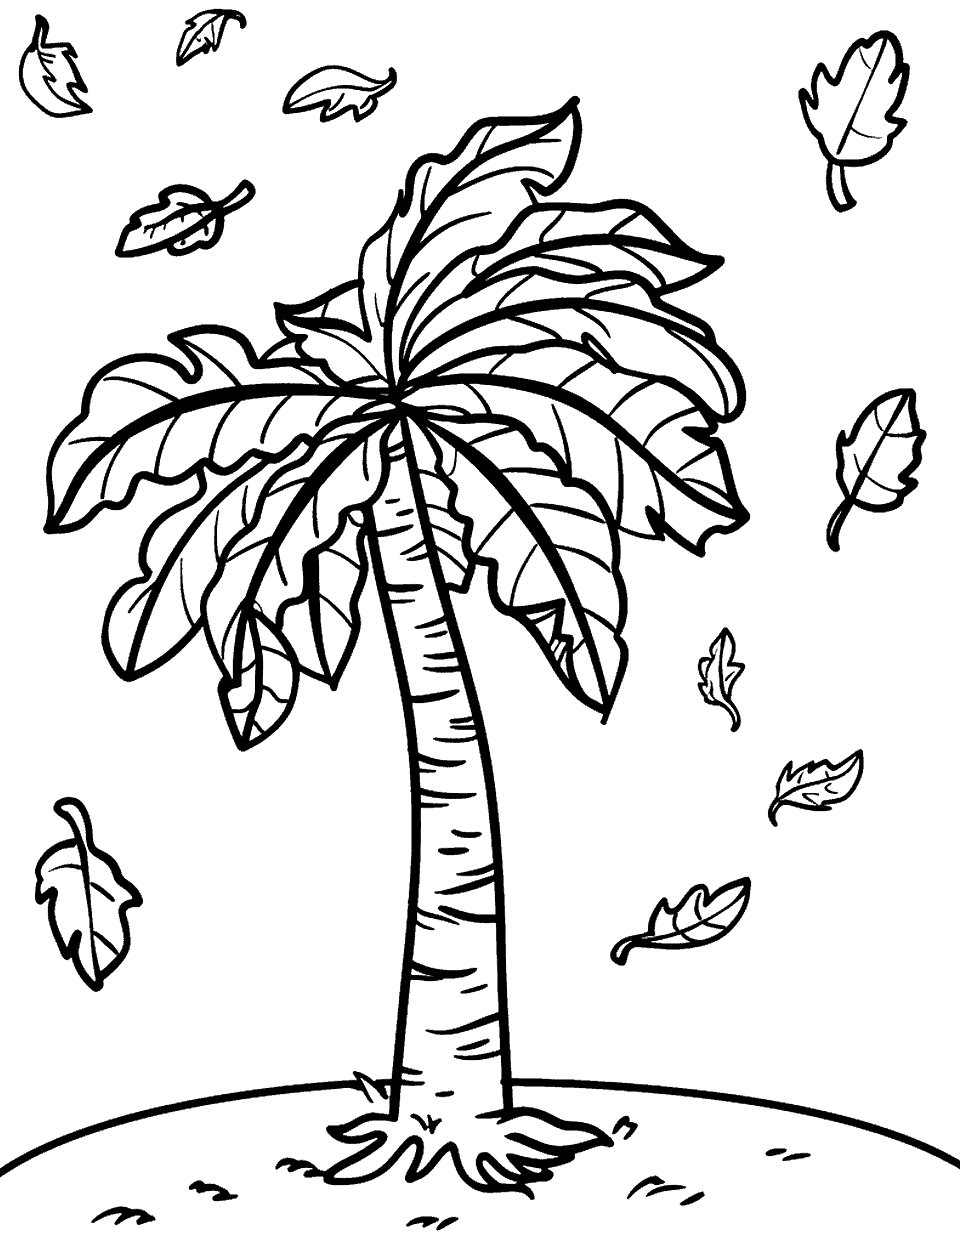 Autumn Leaf Collection Coloring Page - Various leaves falling around a small tree.